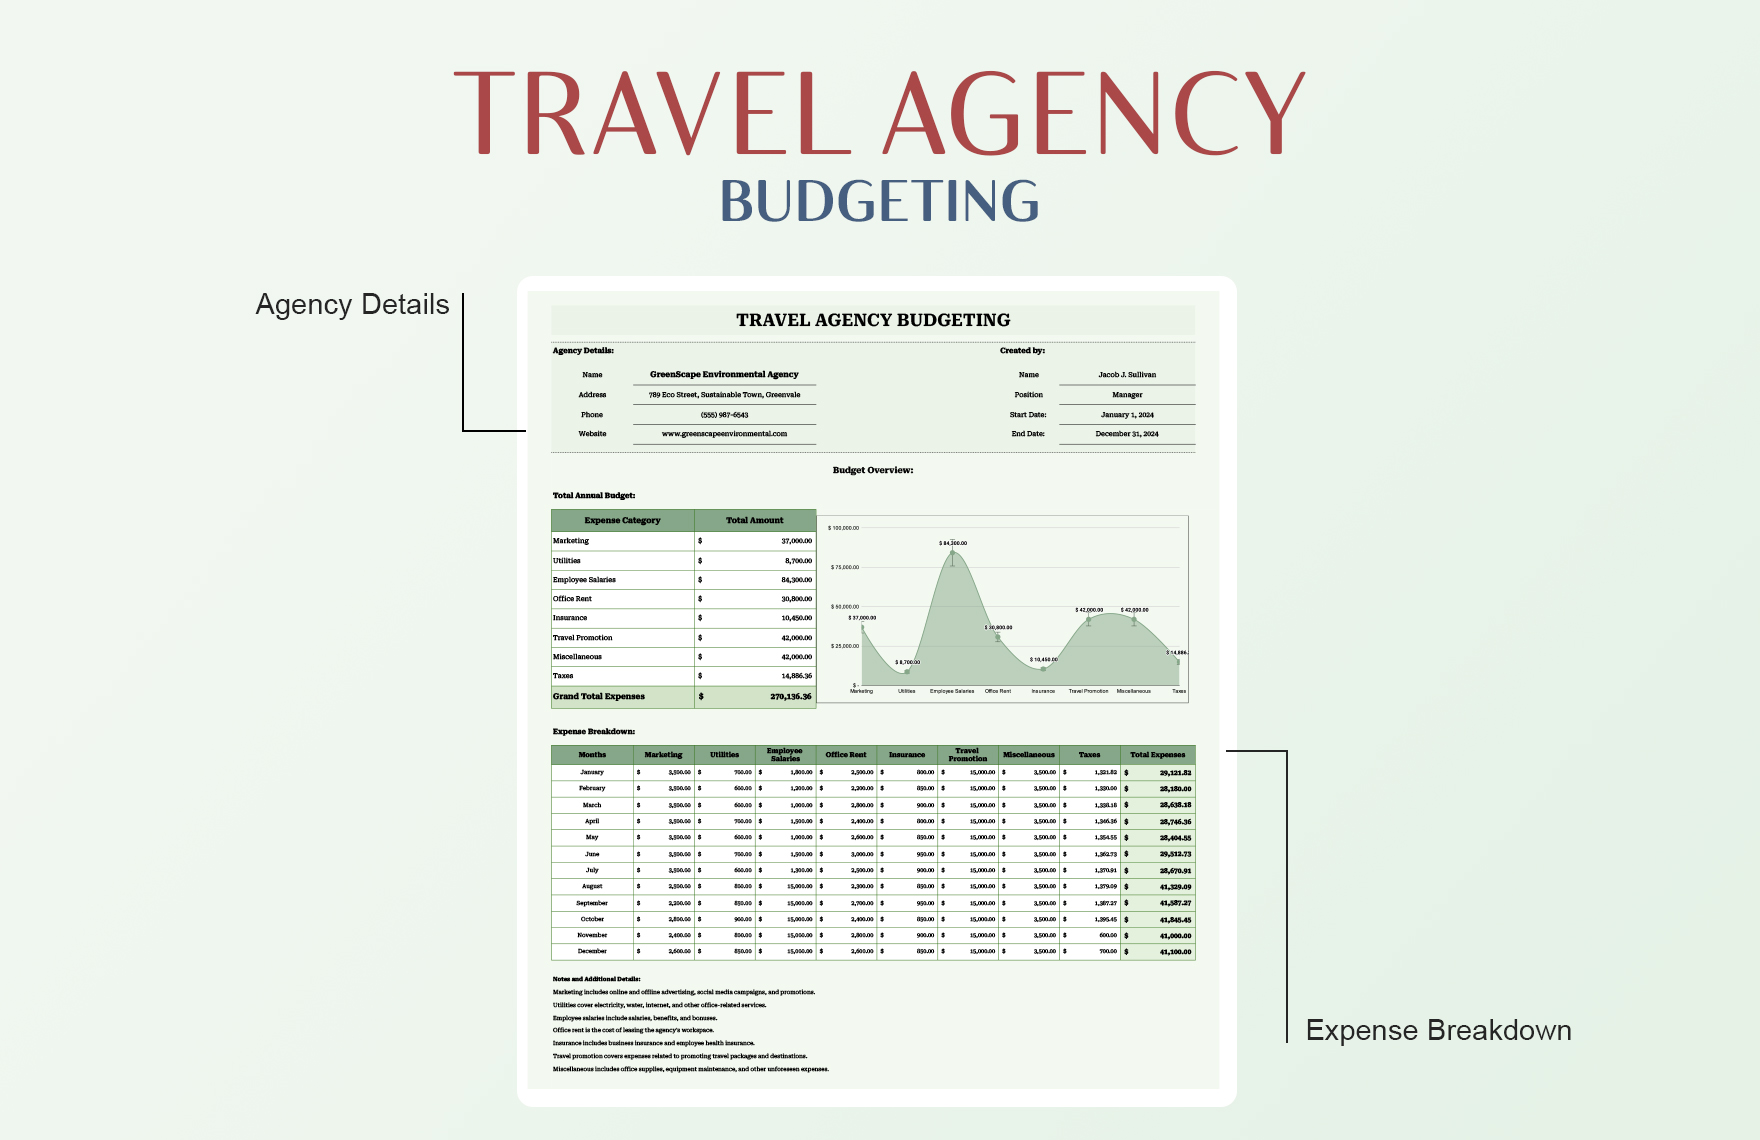 Travel Agency Budgeting Template